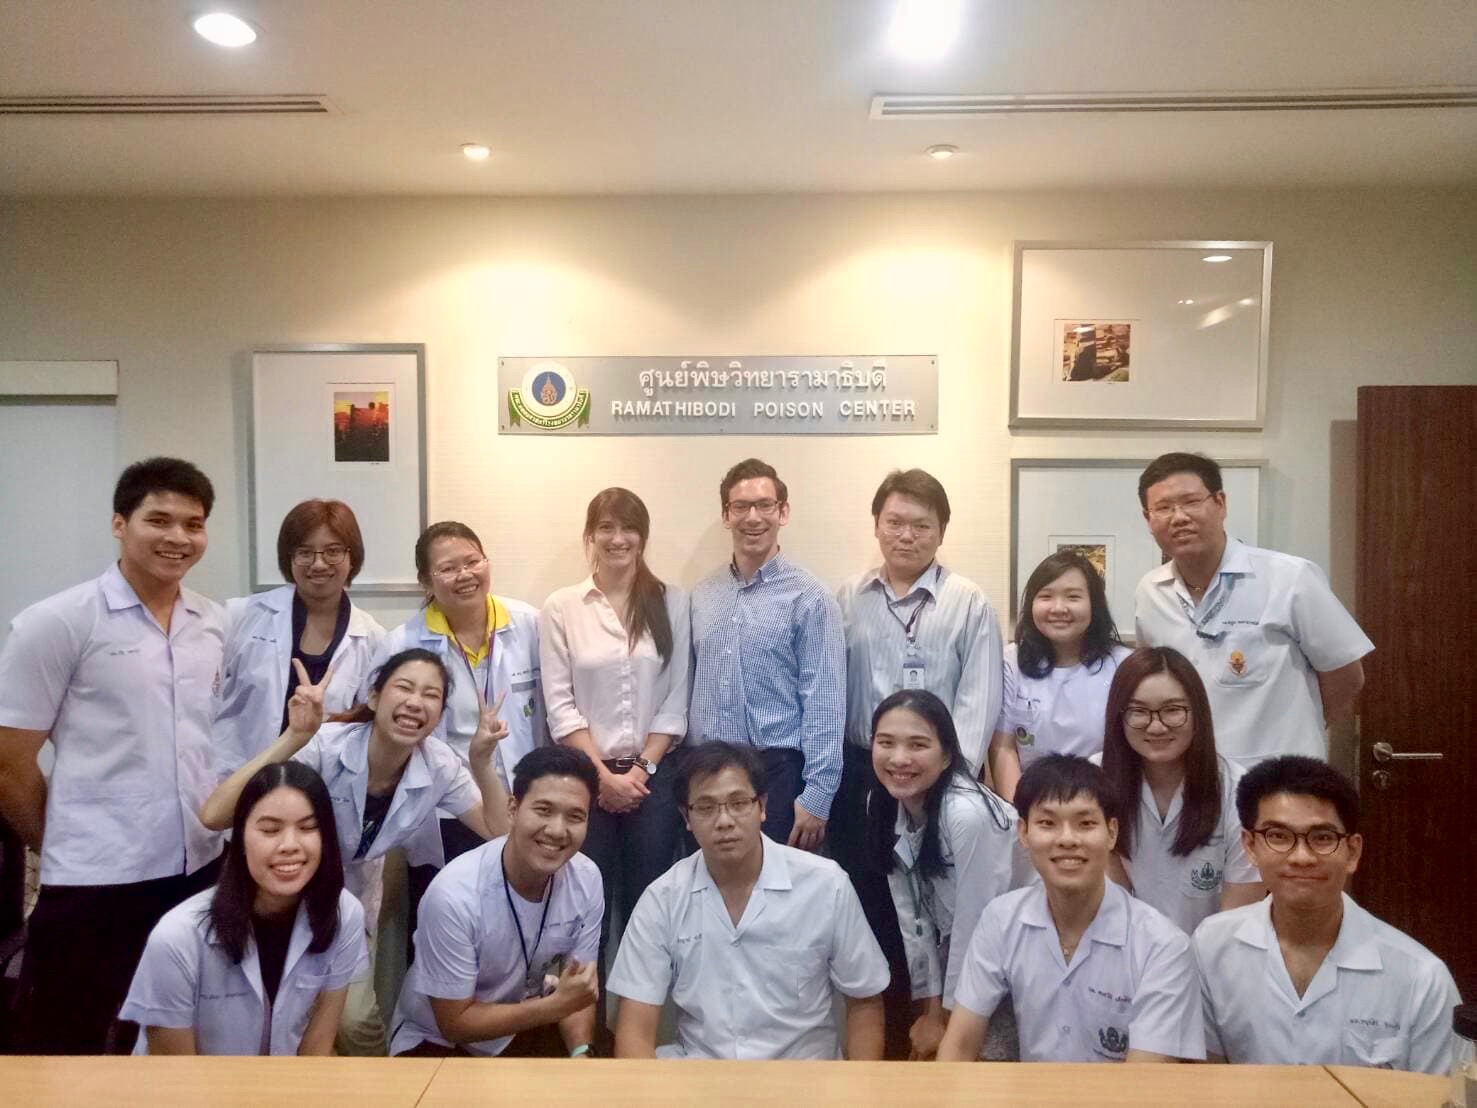 Group photo of Taylore King and Christian Davidson with Thai physicians and medical students at the Ramathibodi Poison Center